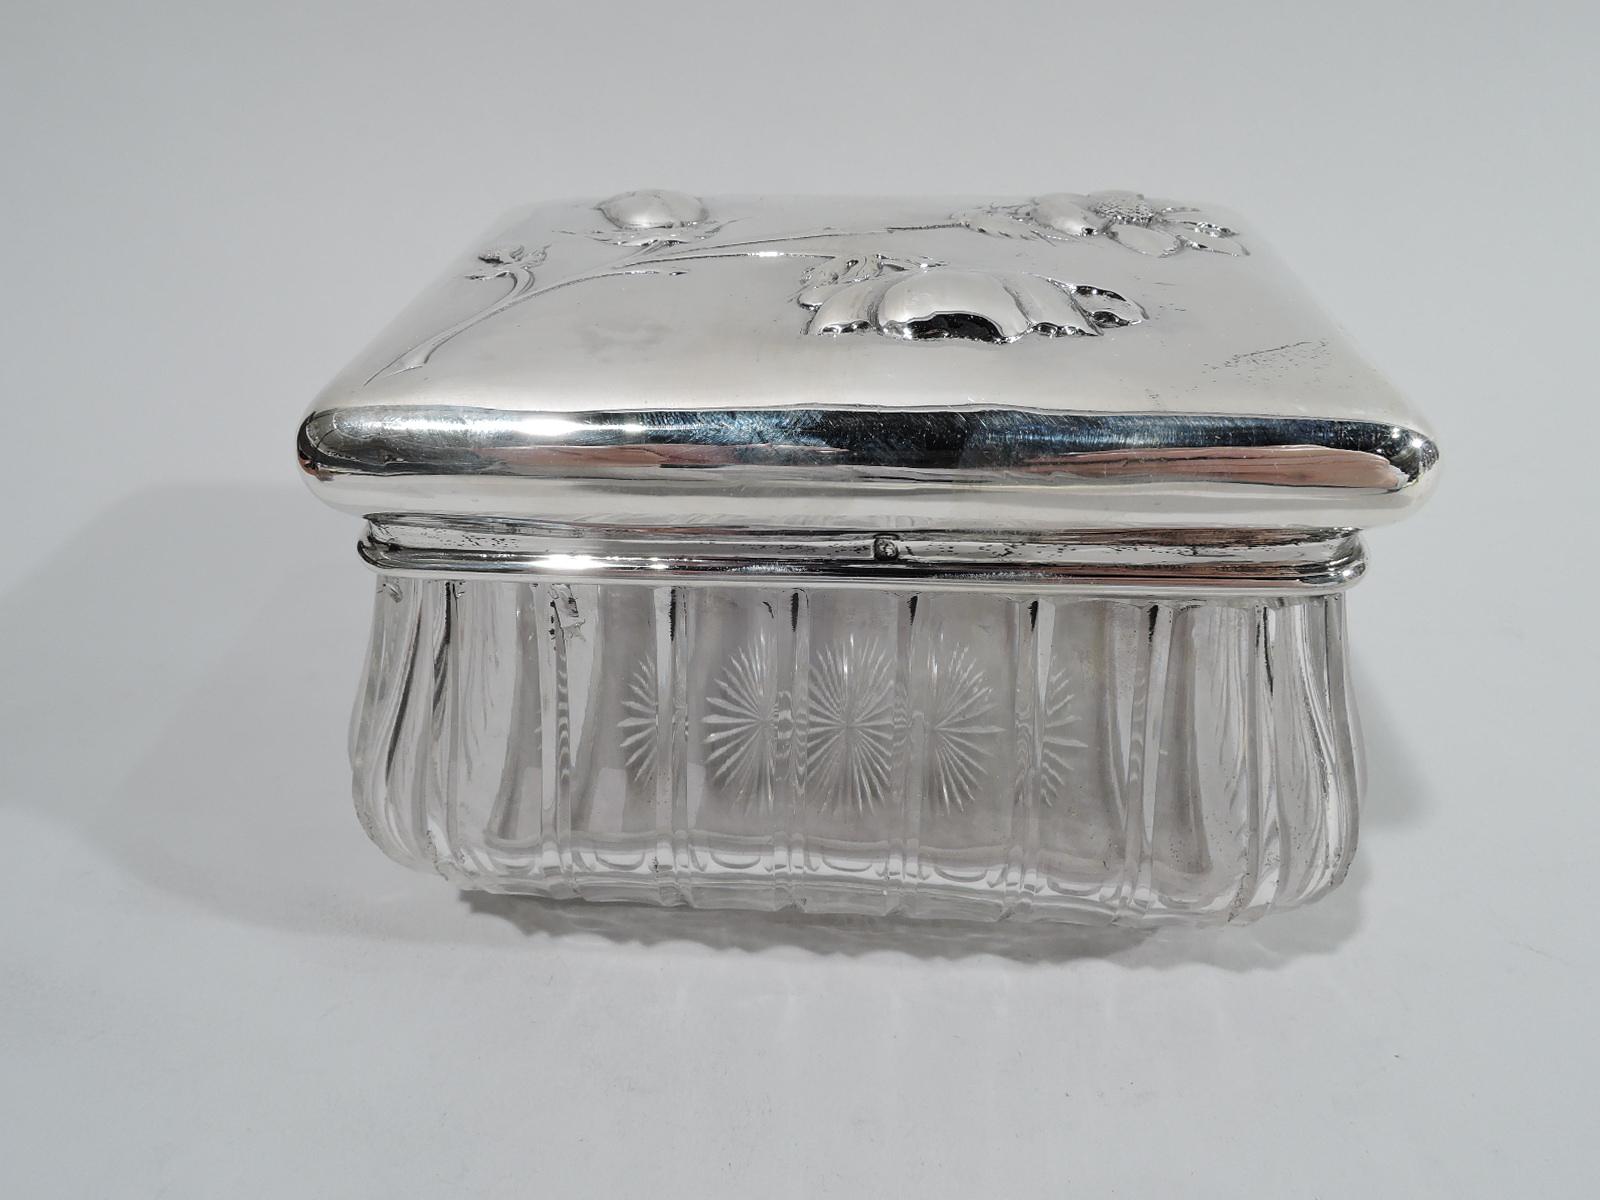 French glass jar with 950 silver mount and cover, ca 1920. Rectangular and bombé with fluted sides and short inset foot with cut star. Collar silver as is cover with curved sides; top raised with chased flowers in various stages of blooming. Pretty